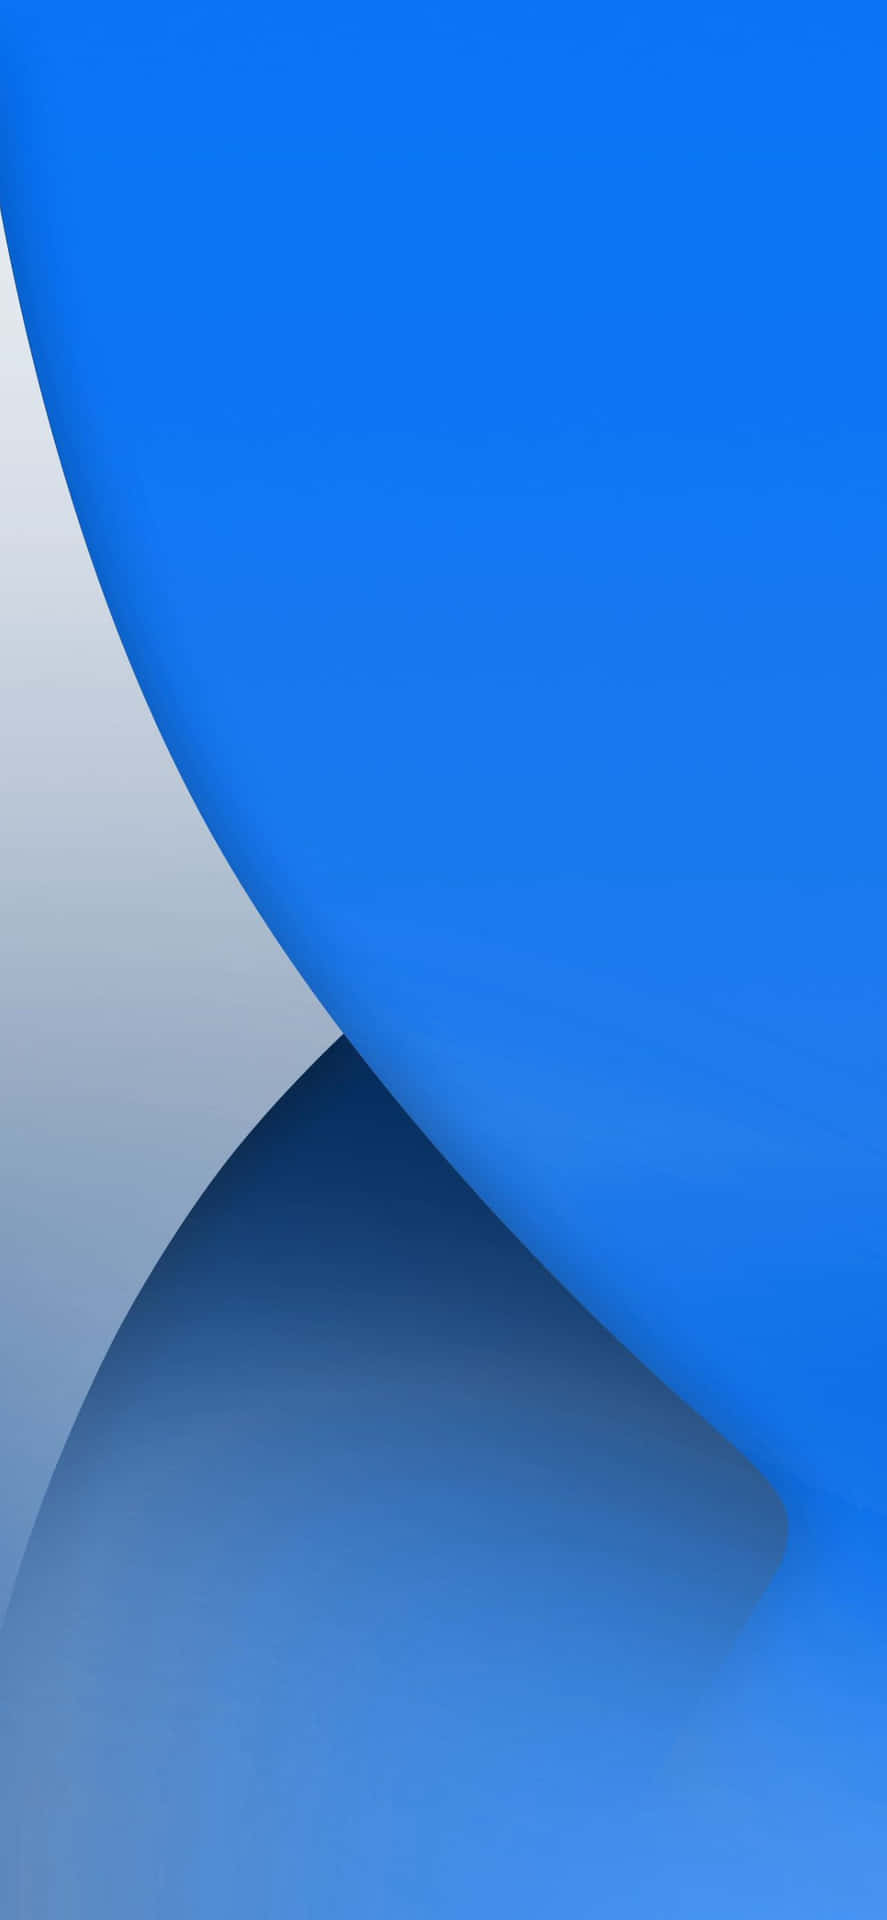 A Blue Background With A White Curved Line